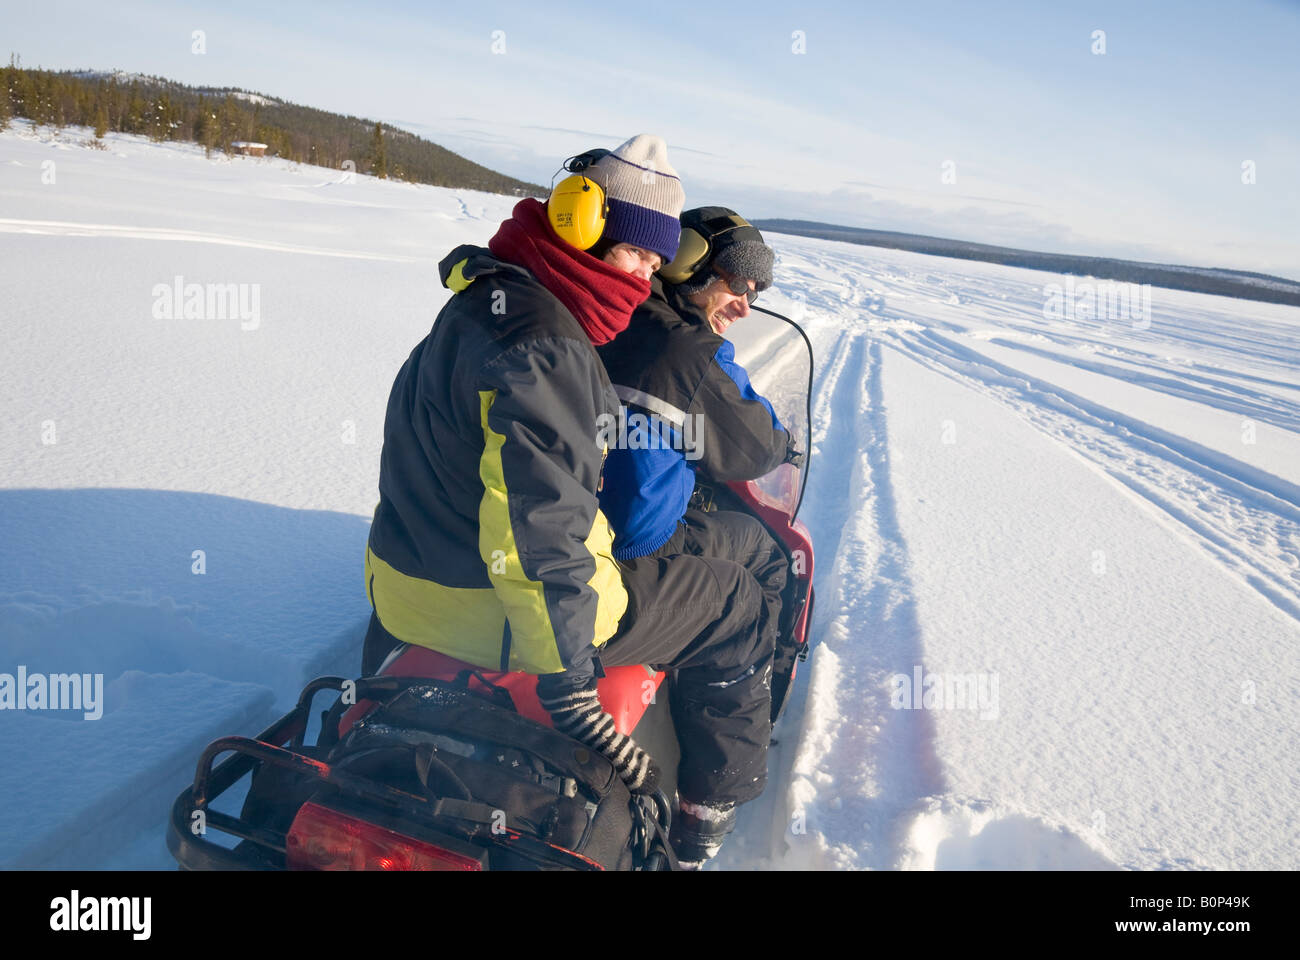 Two women in their fourties ride a Lynx snowmobile in snowy Lapland / northern Sweden Stock Photo